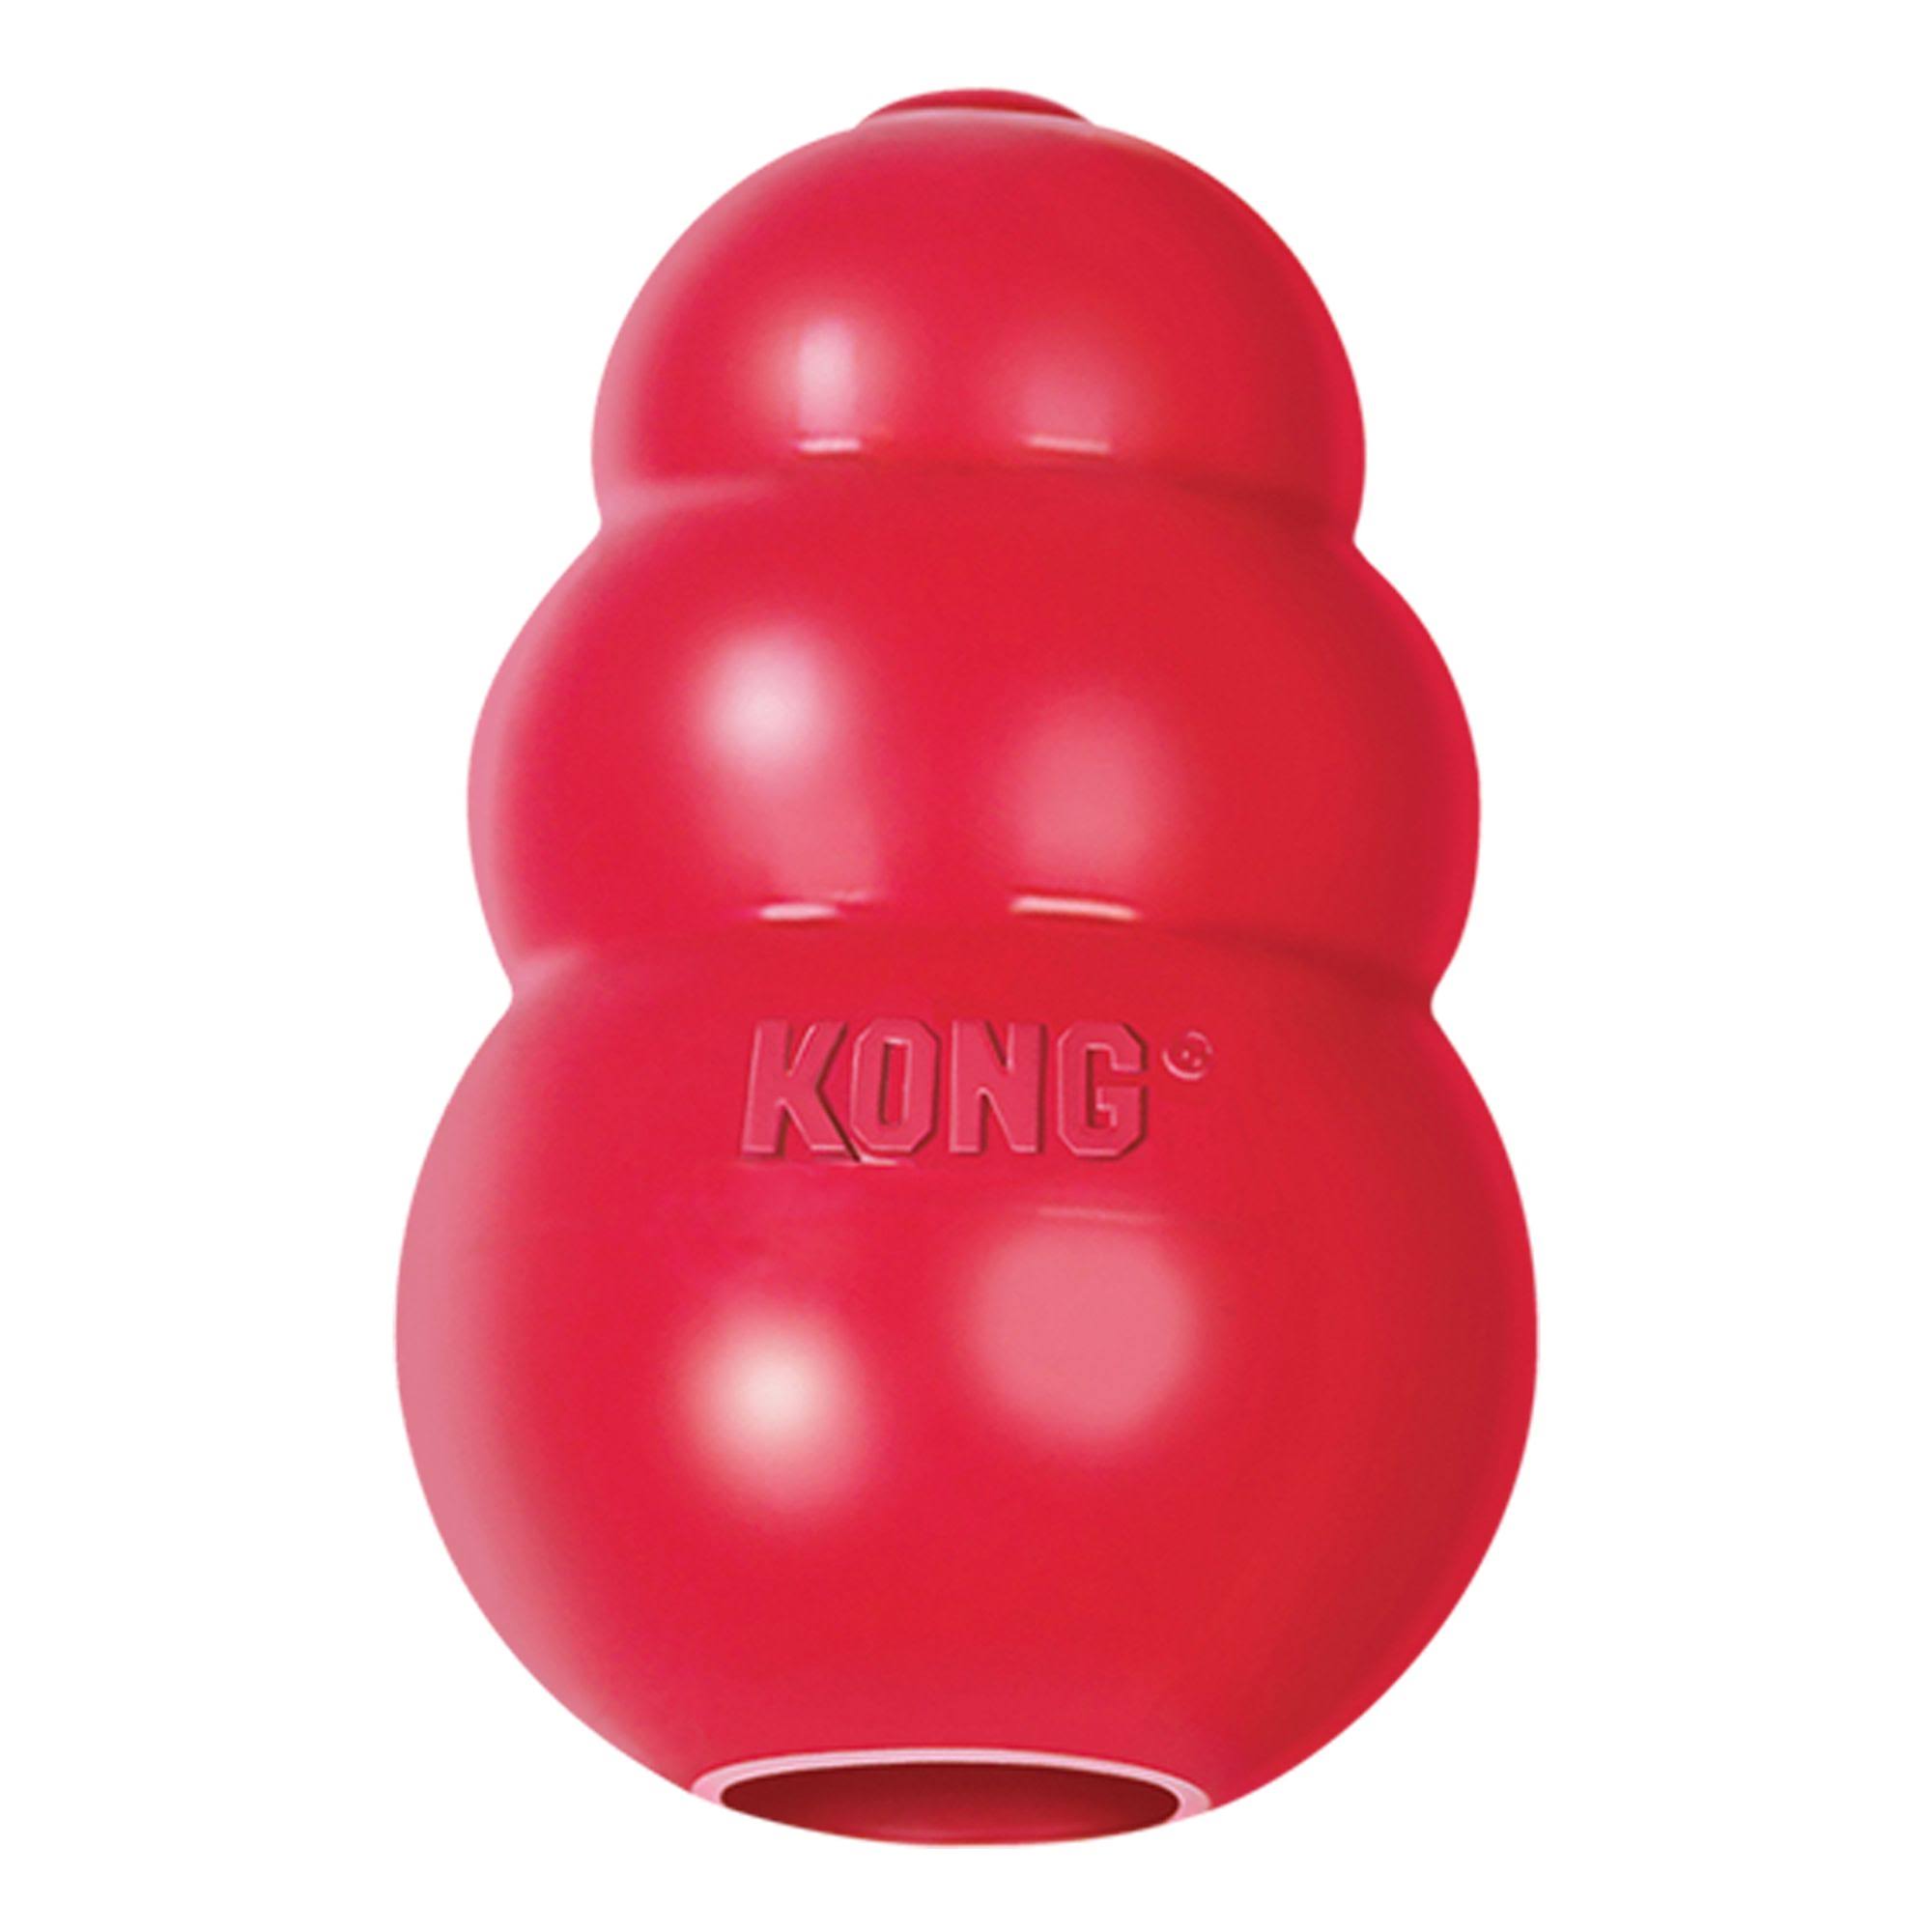 Kong Classic Kong Dog Toy - Red, Small